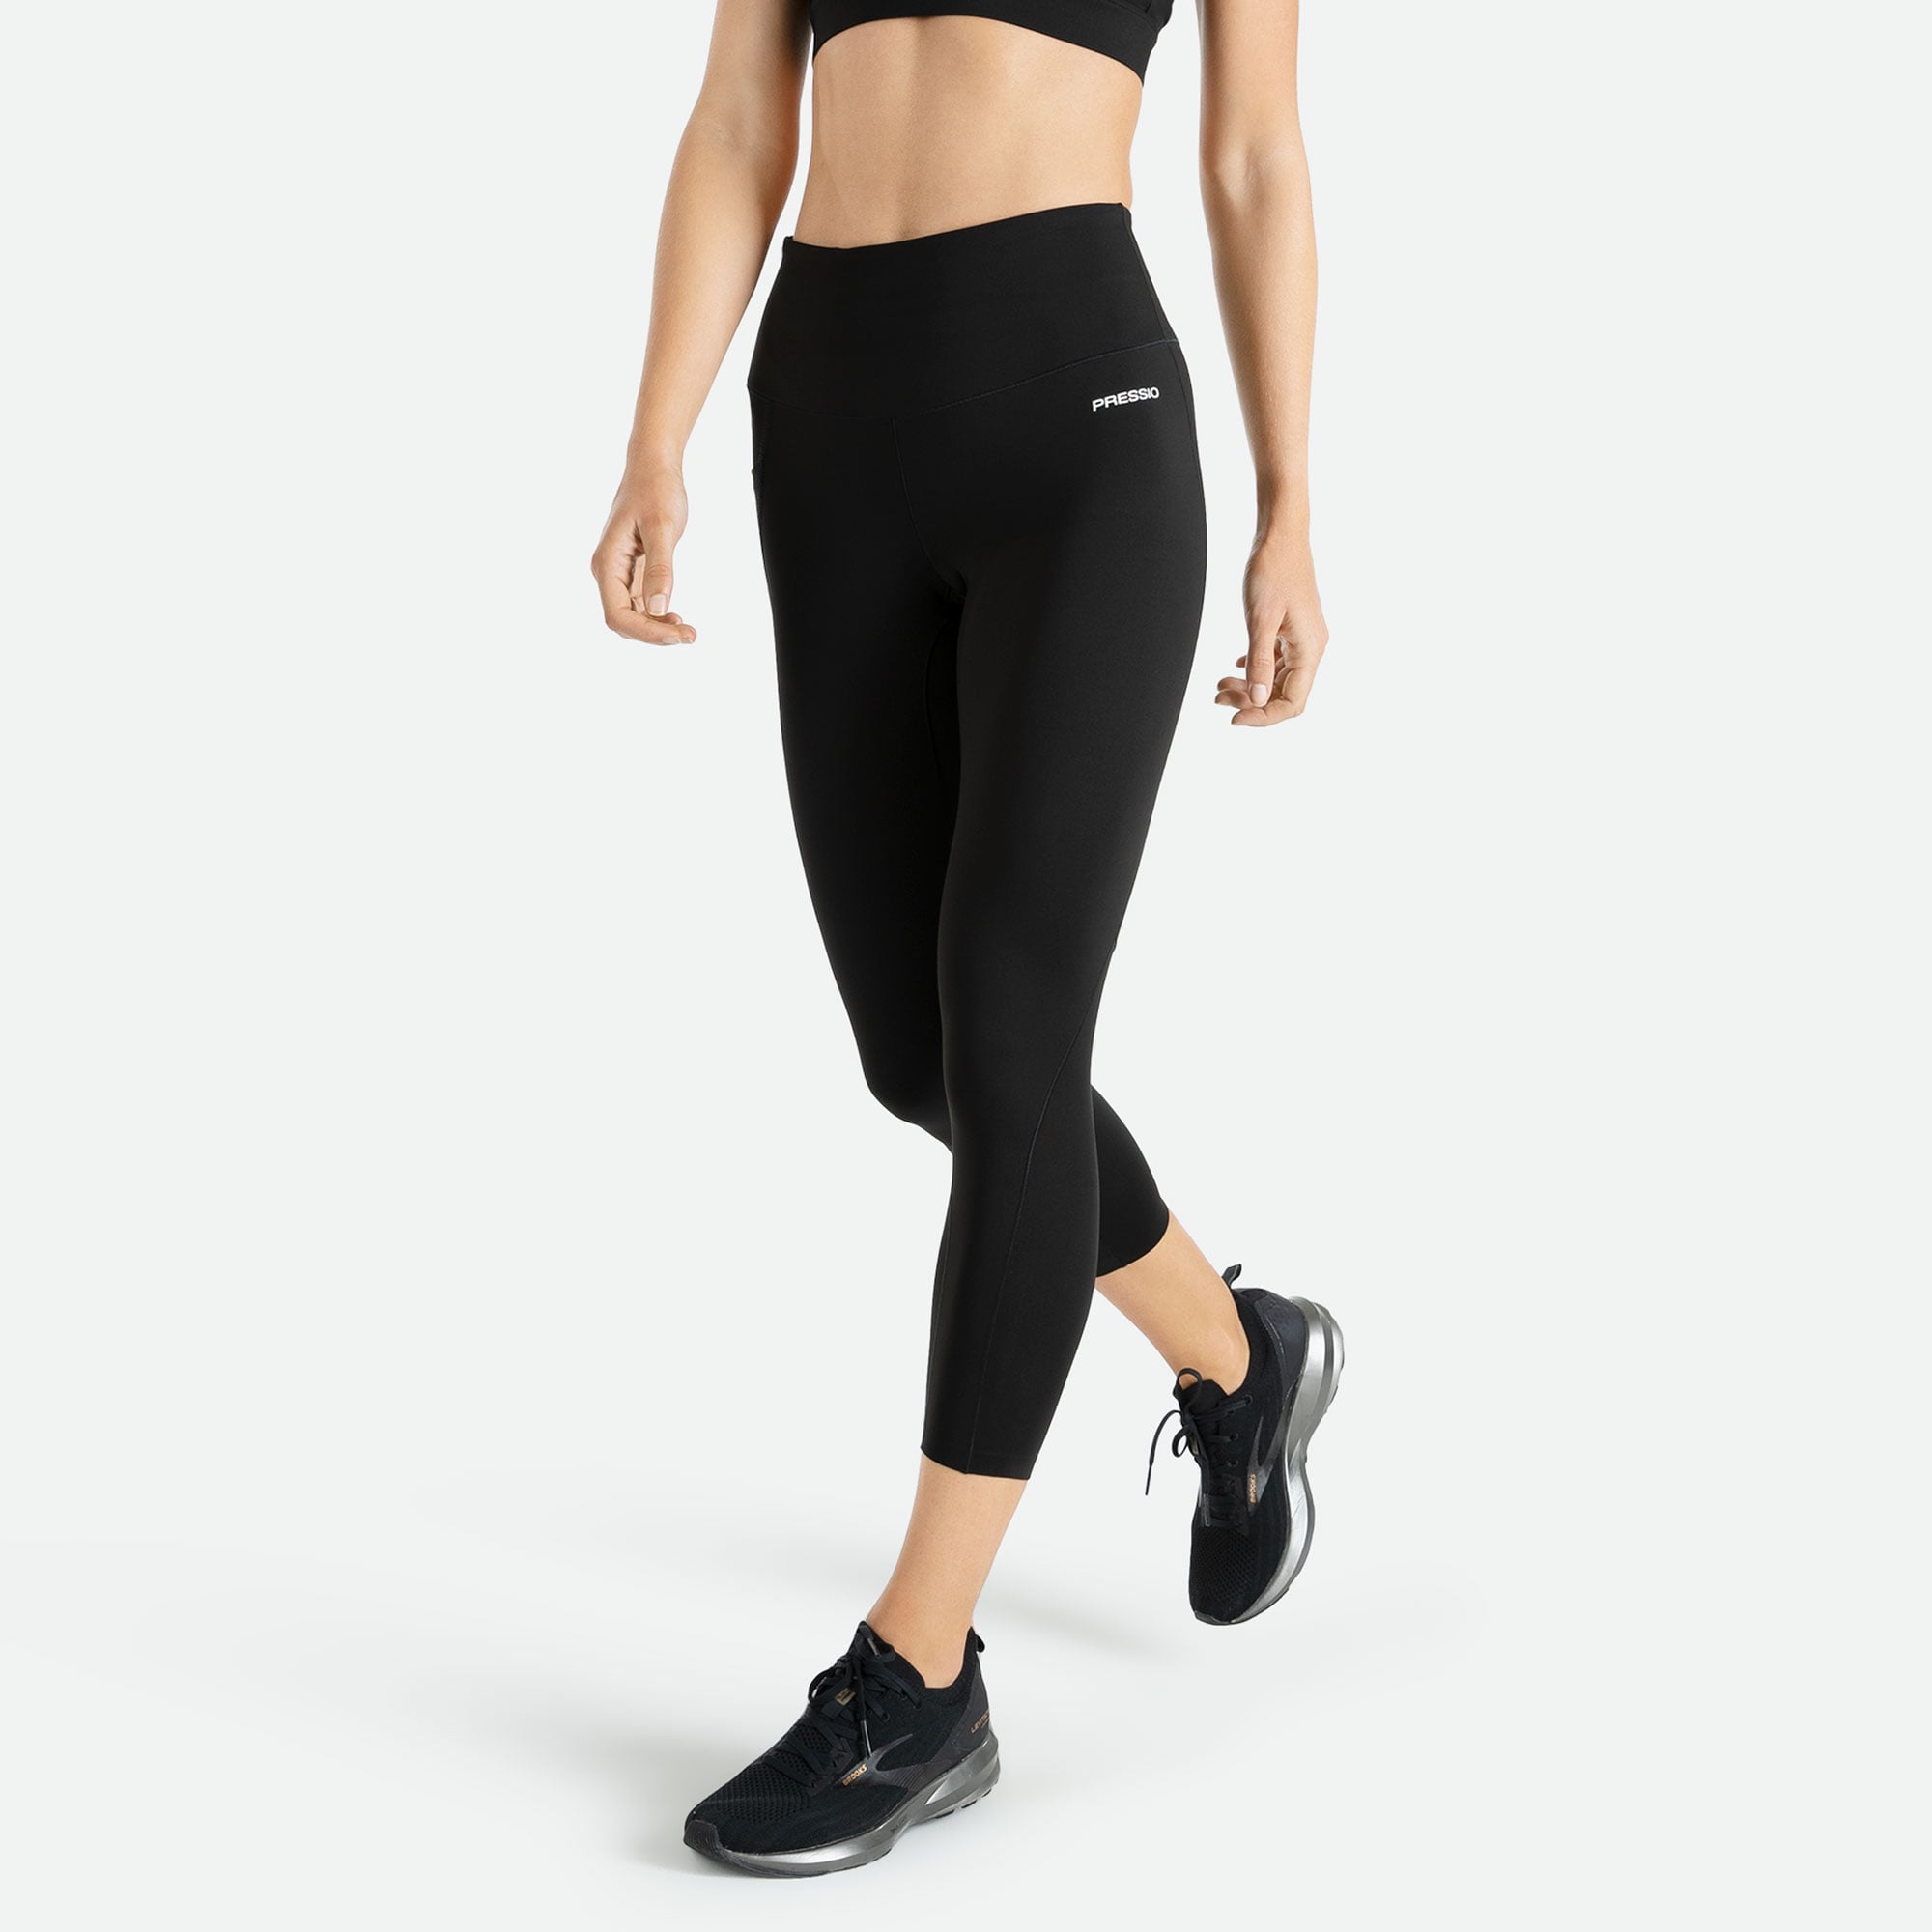 How to Get the Best Squat Proof Leggings for Workout - Shape Brazil